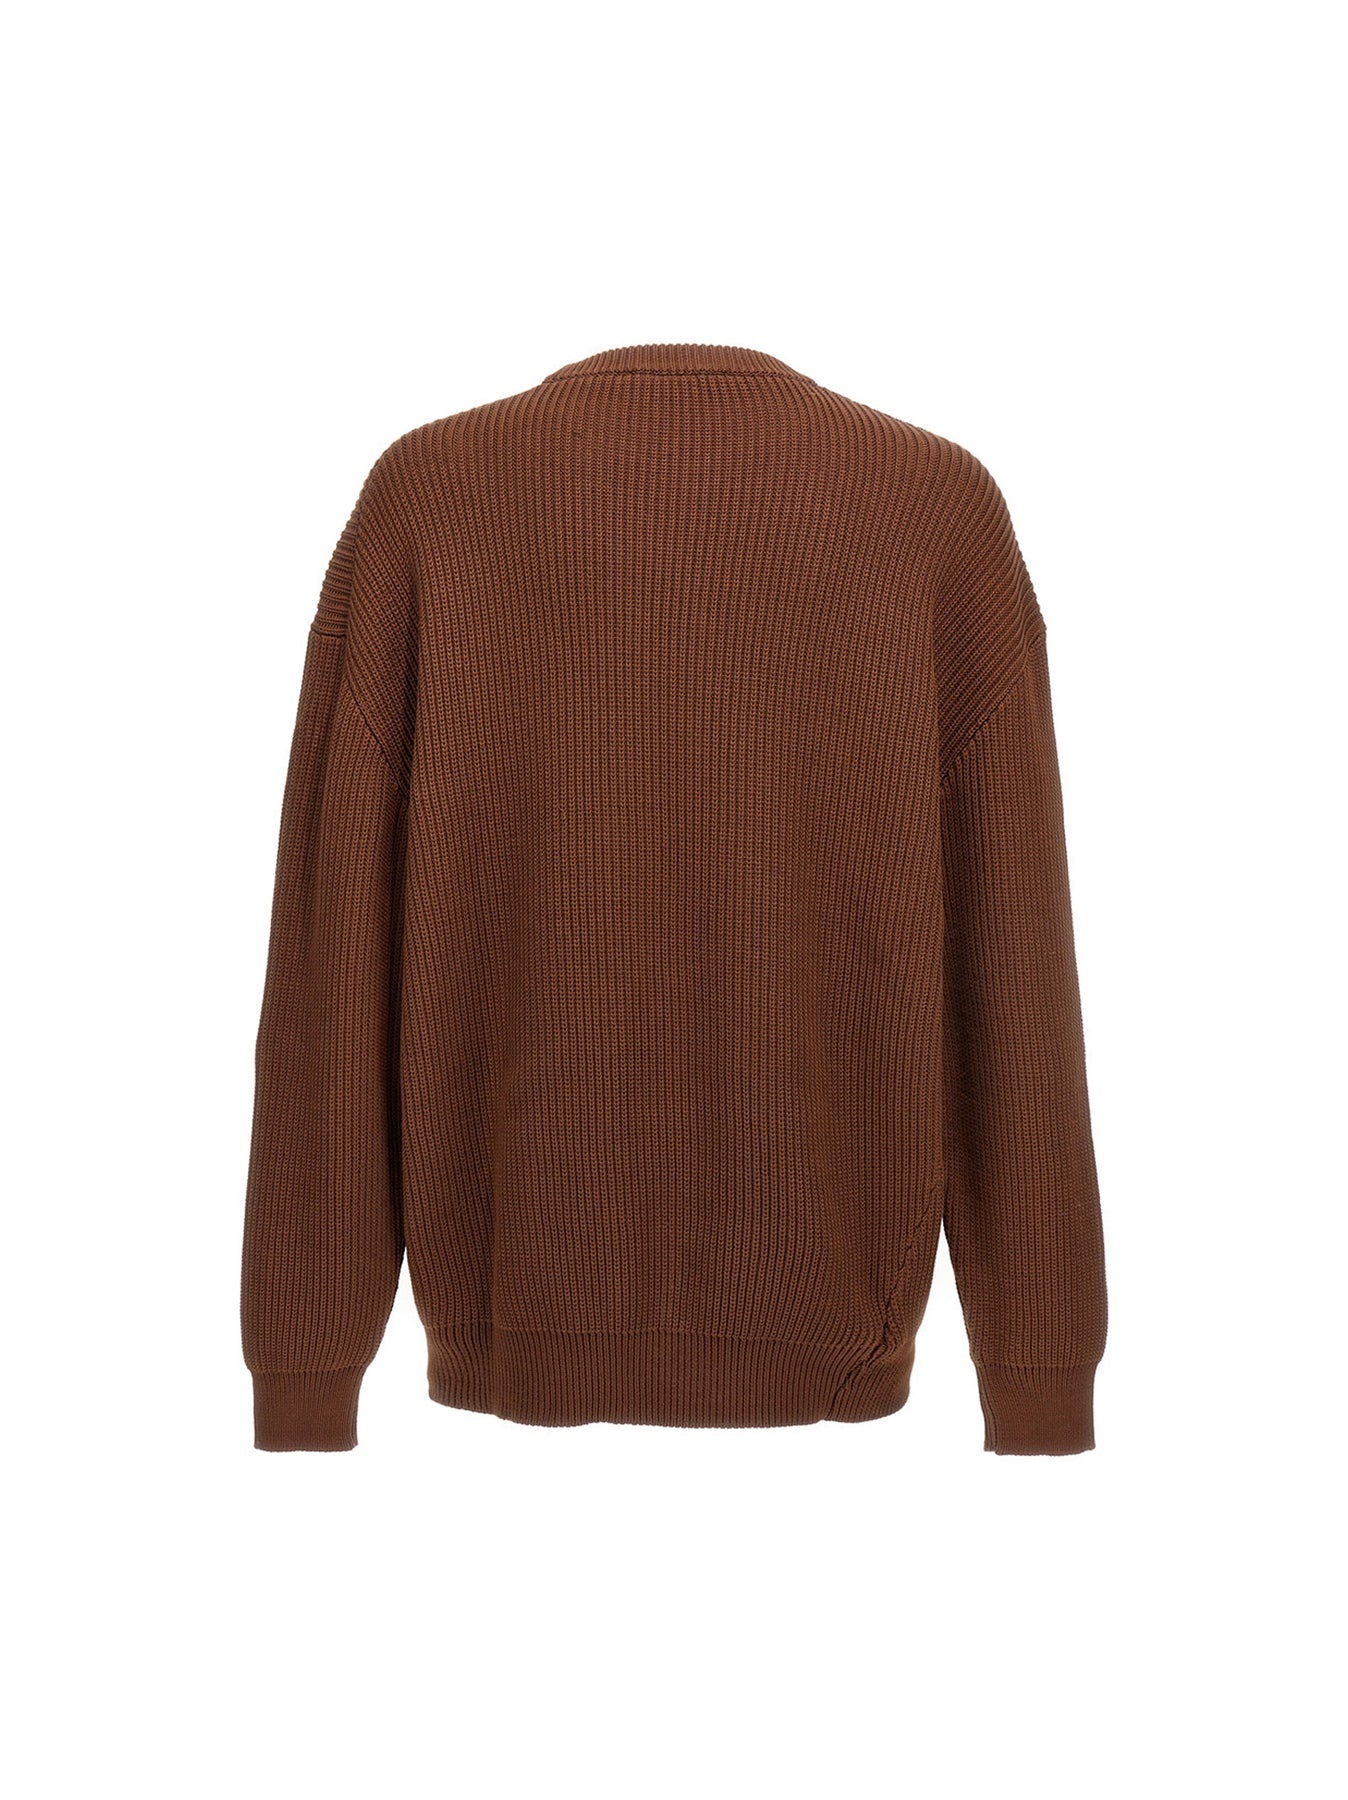 Twisted Sweater, Cardigans Brown - 2